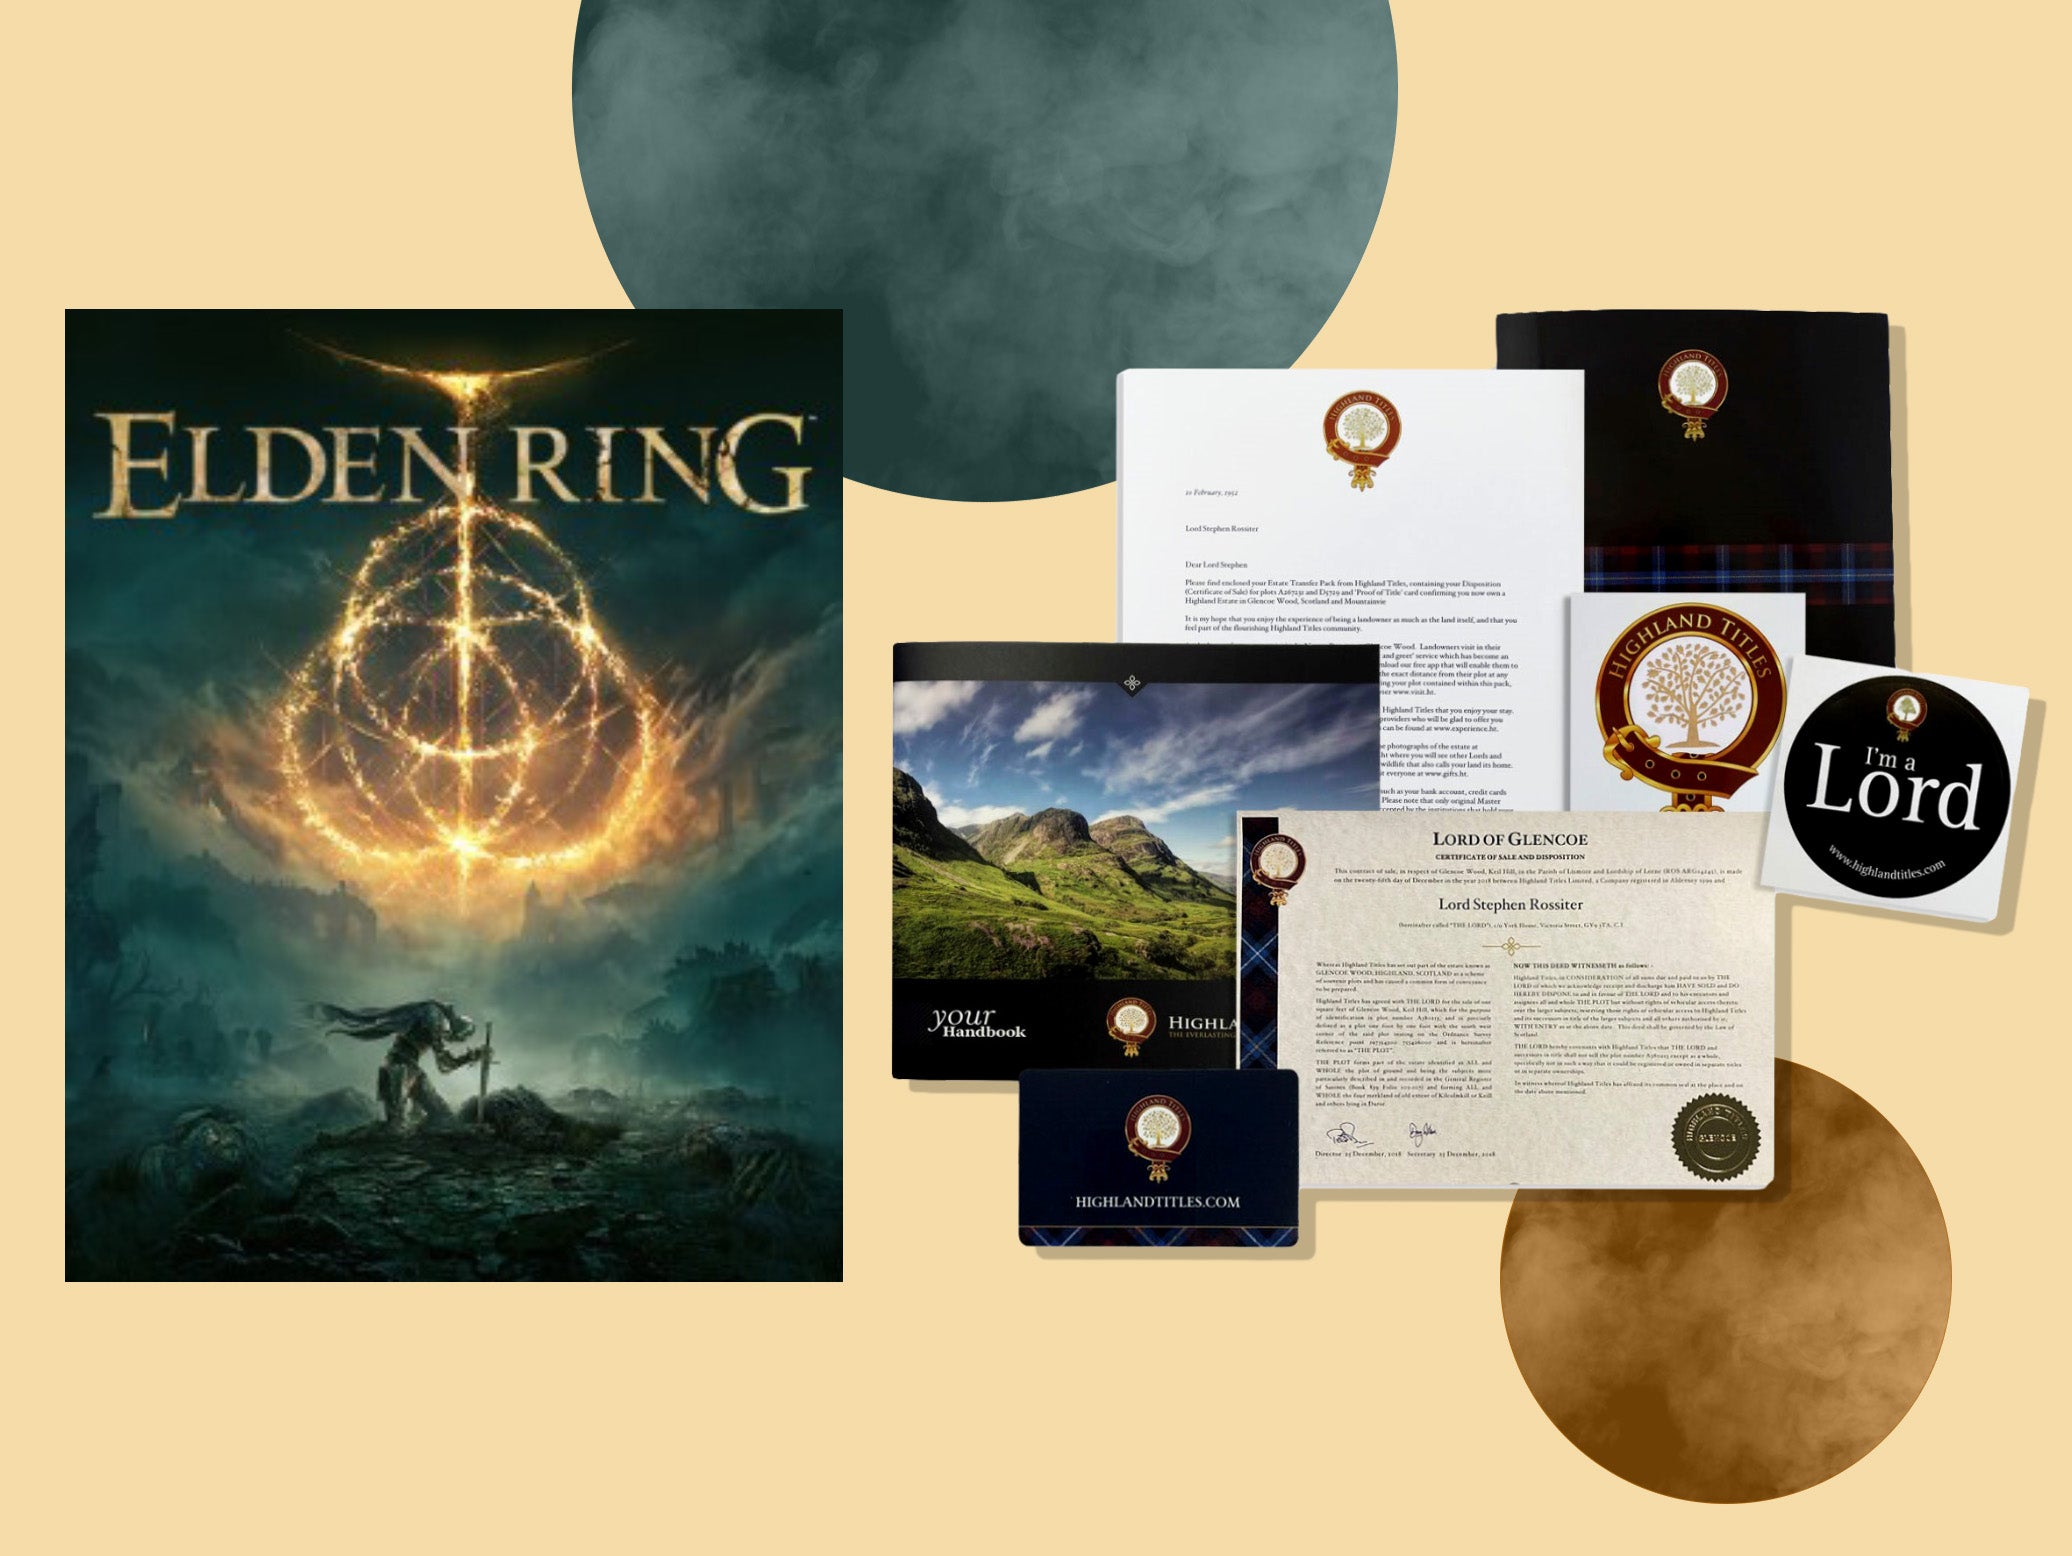 Buying Game of the Year ELDEN RING from Turkey PlayStation